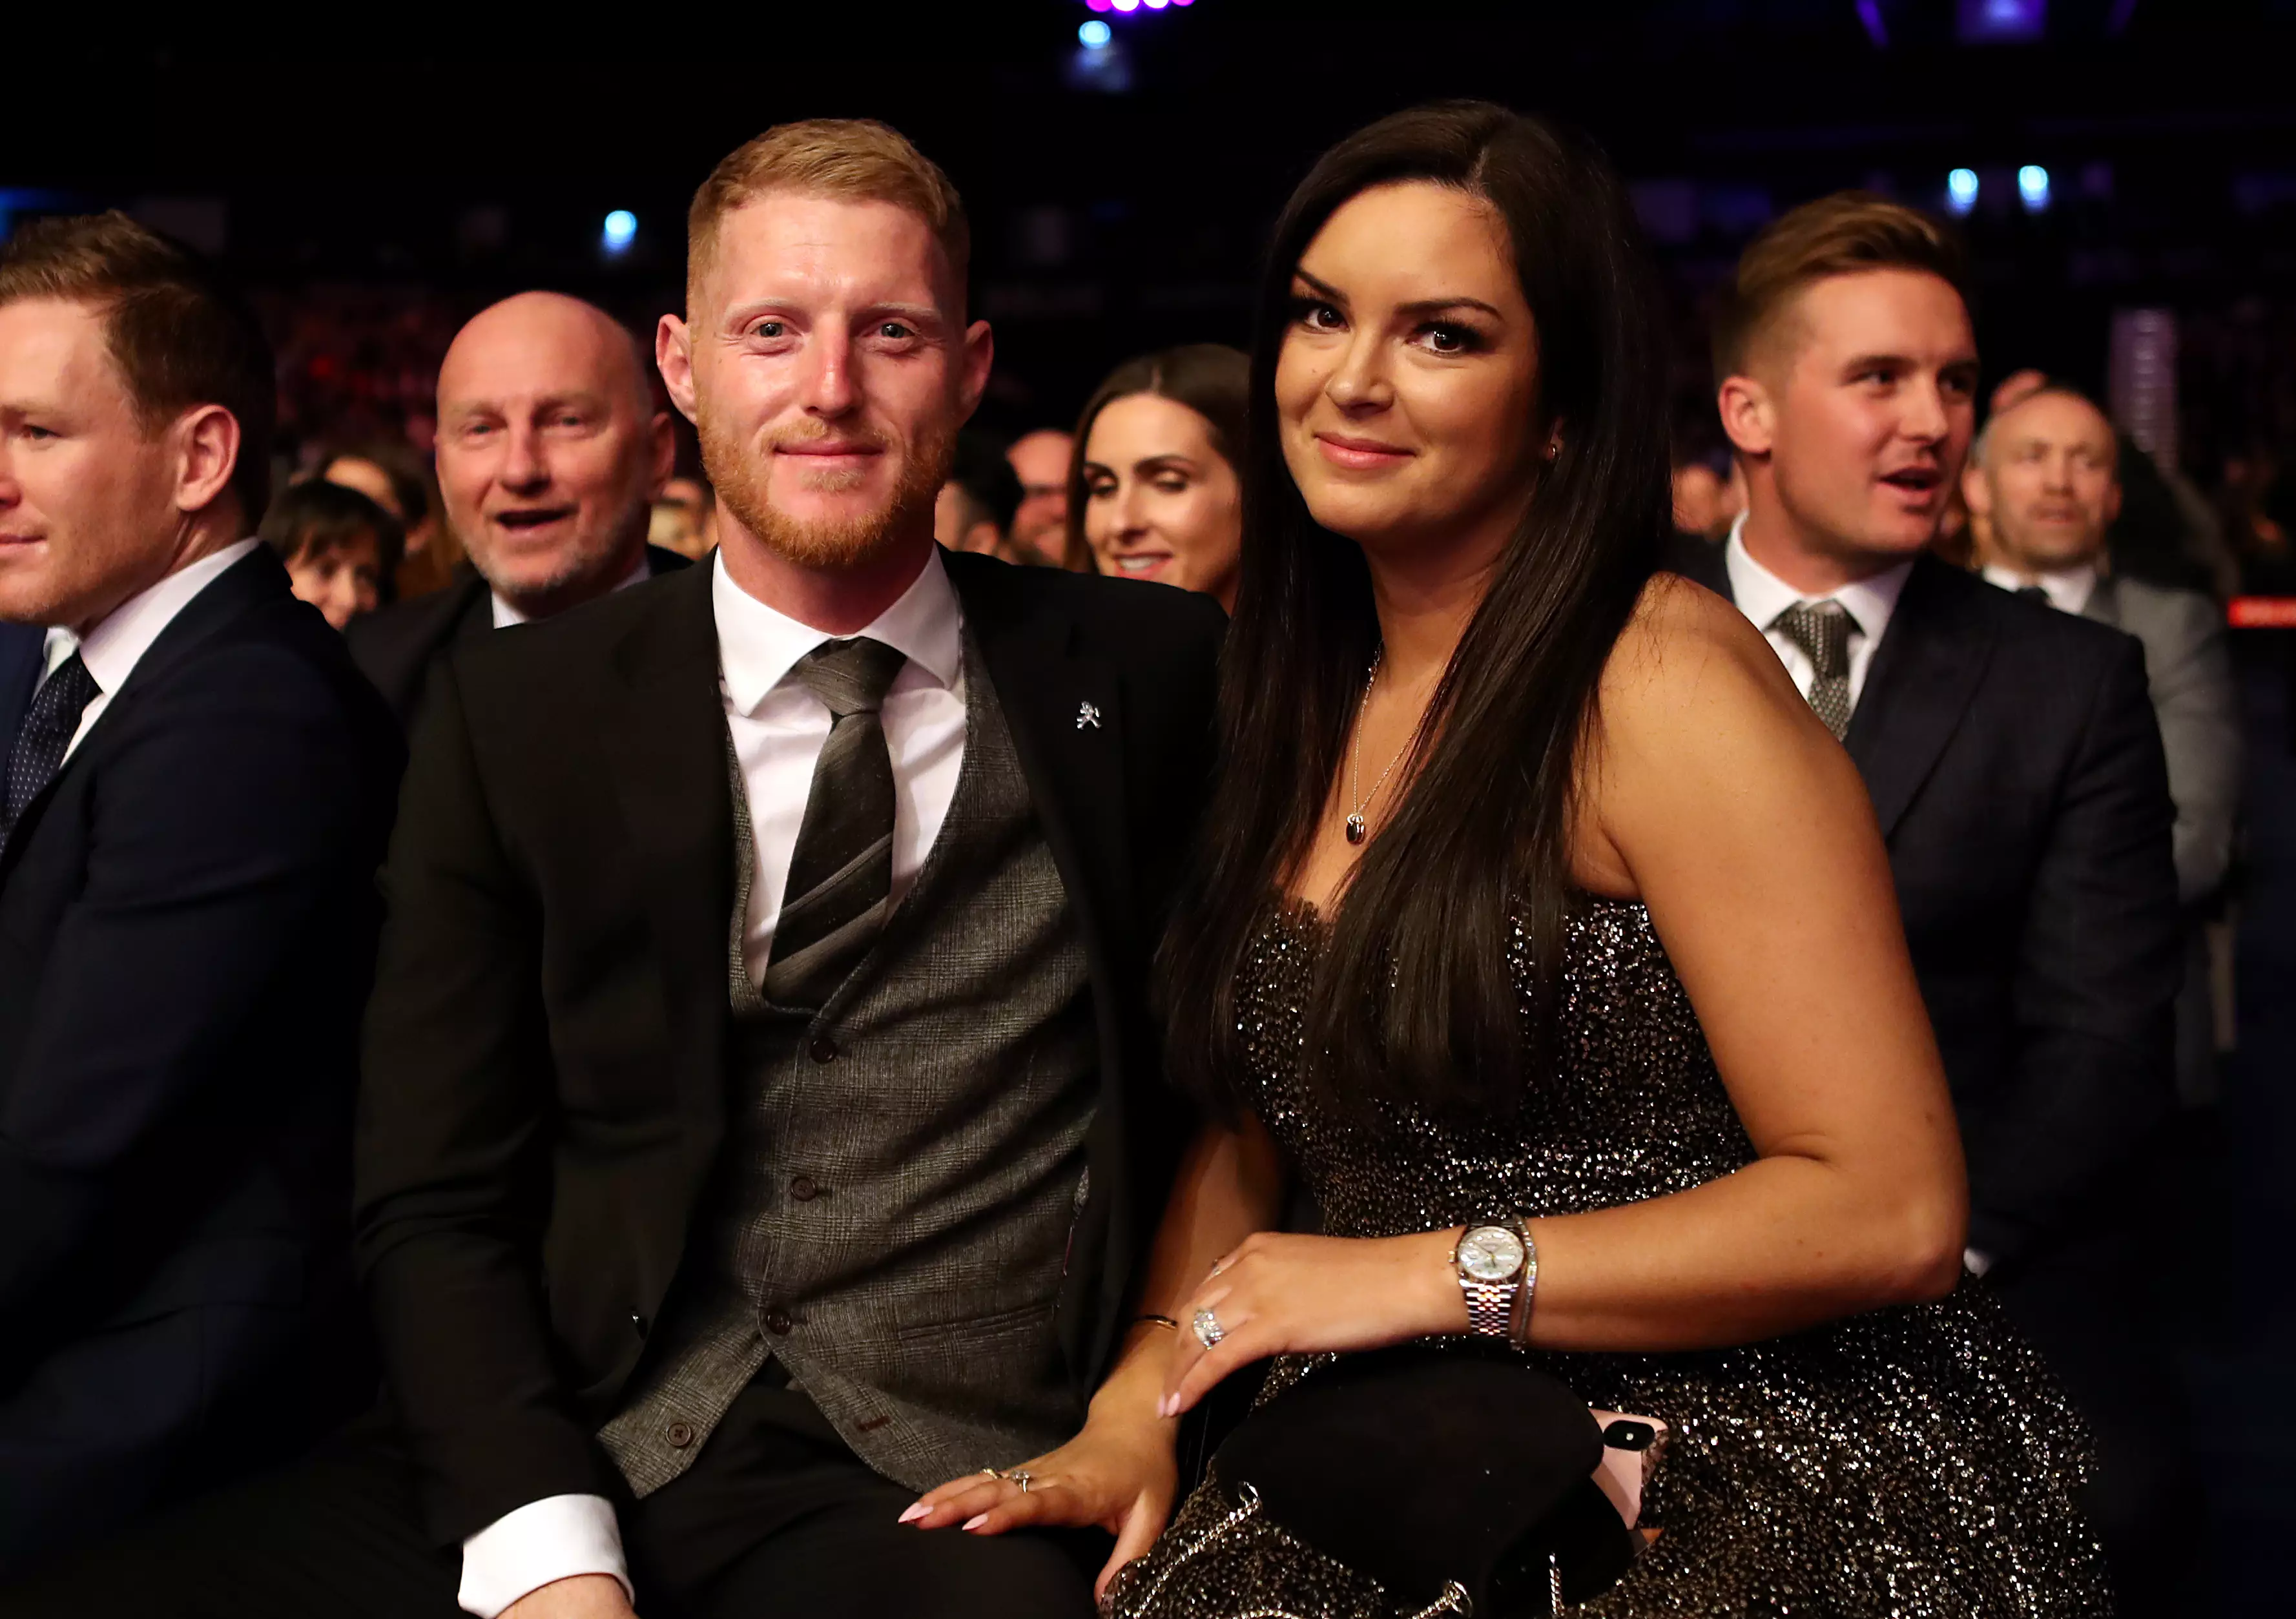 Ben Stokes and his wife Claire Ratcliffe at tonight's event.